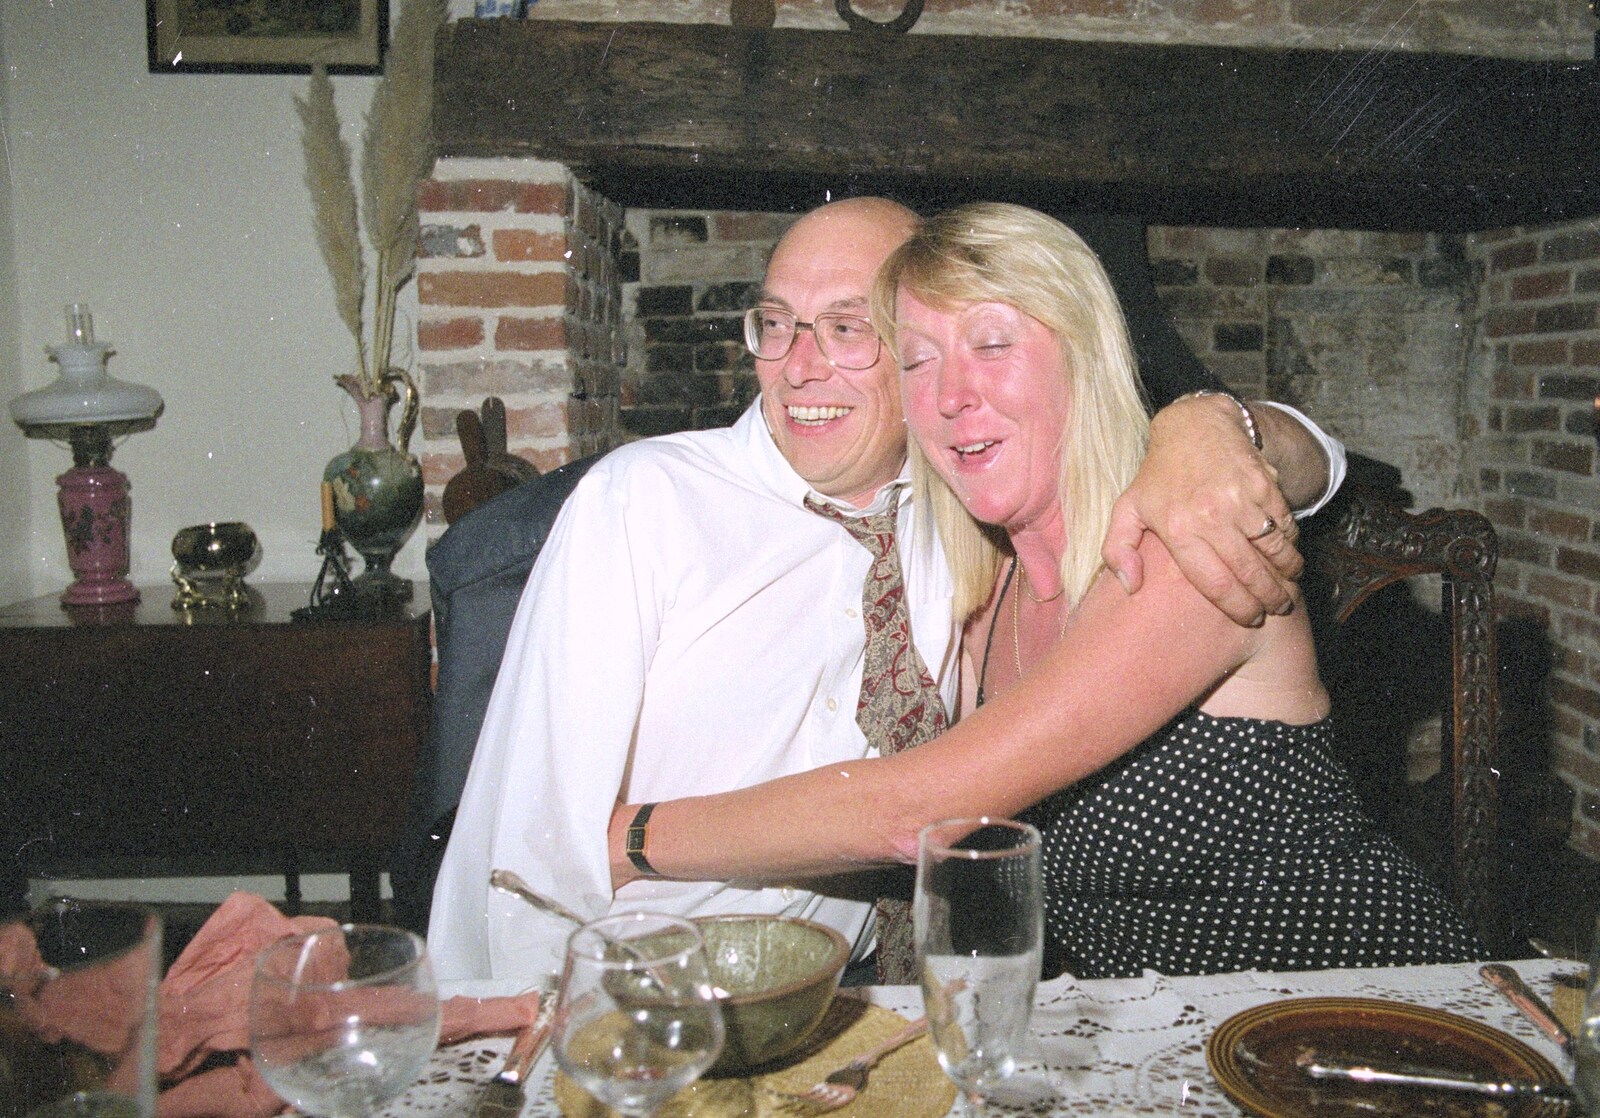 Kipper and Mad Sue from Nosher's Dinner Party, Stuston, Suffolk - 14th September 1991